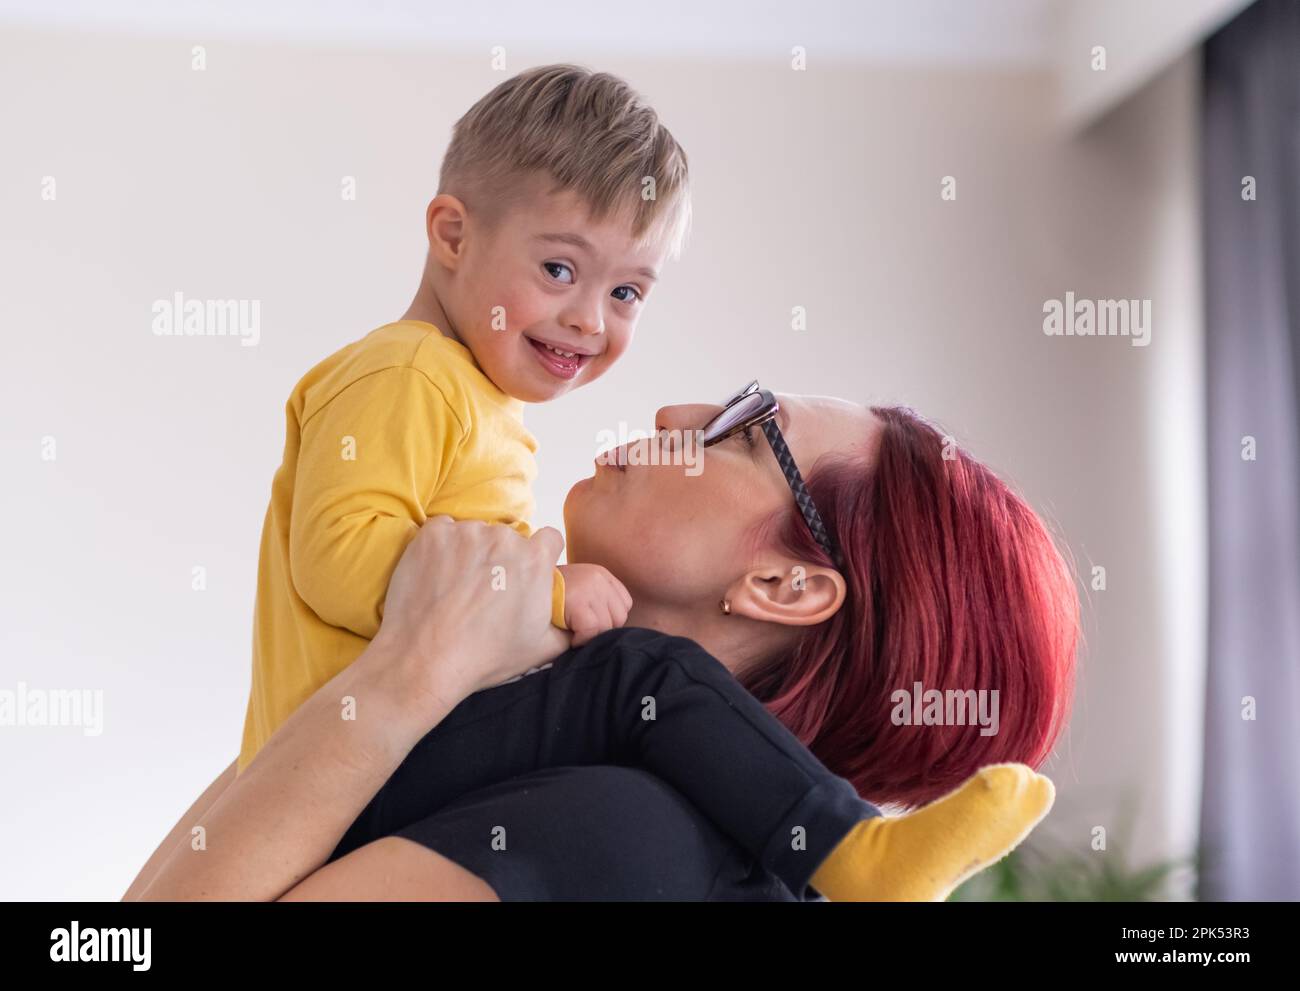 mother and child with Down syndrome exploring creativity with toy blocks, enjoying relaxing activity Stock Photo